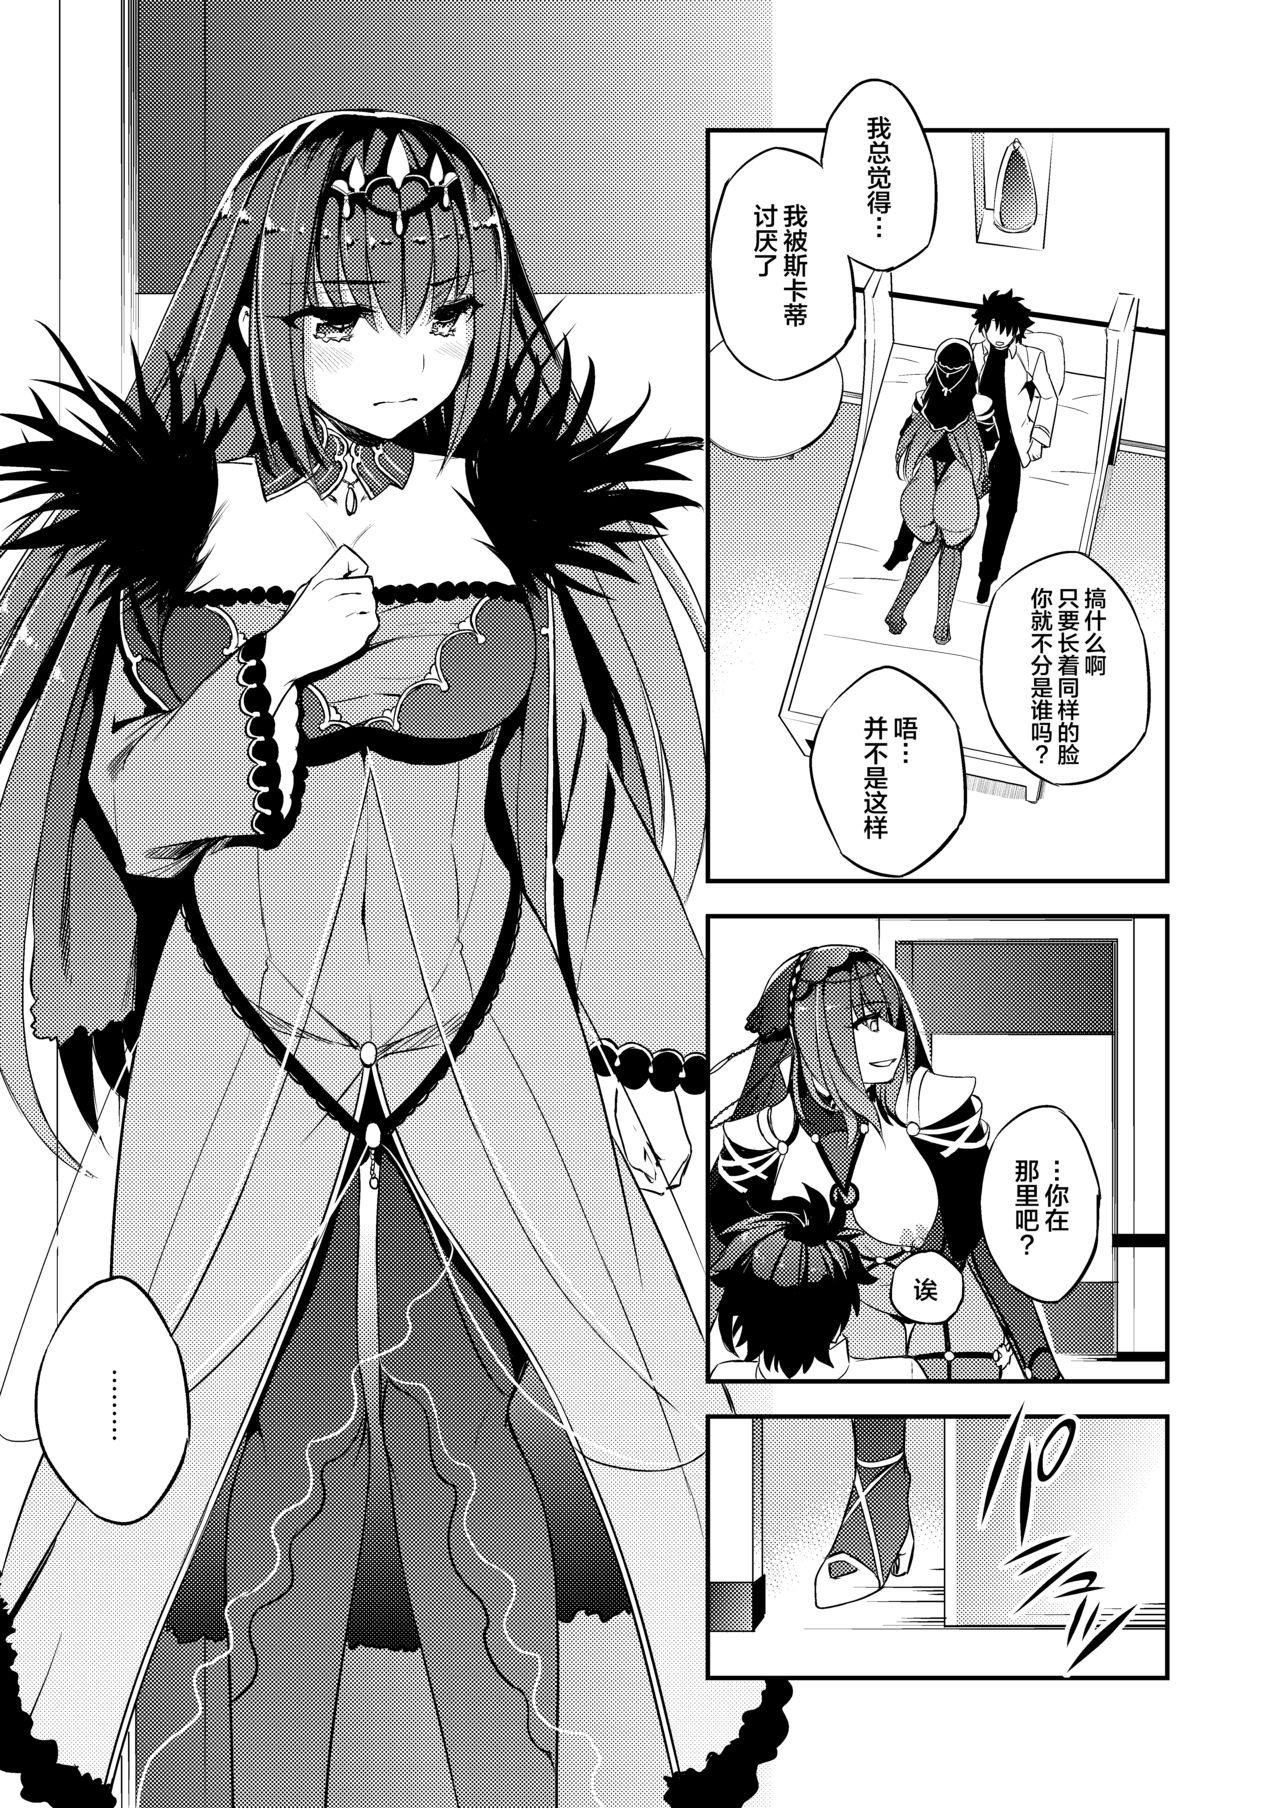 Asia C9-39 W Scathach to - Fate grand order Made - Page 5